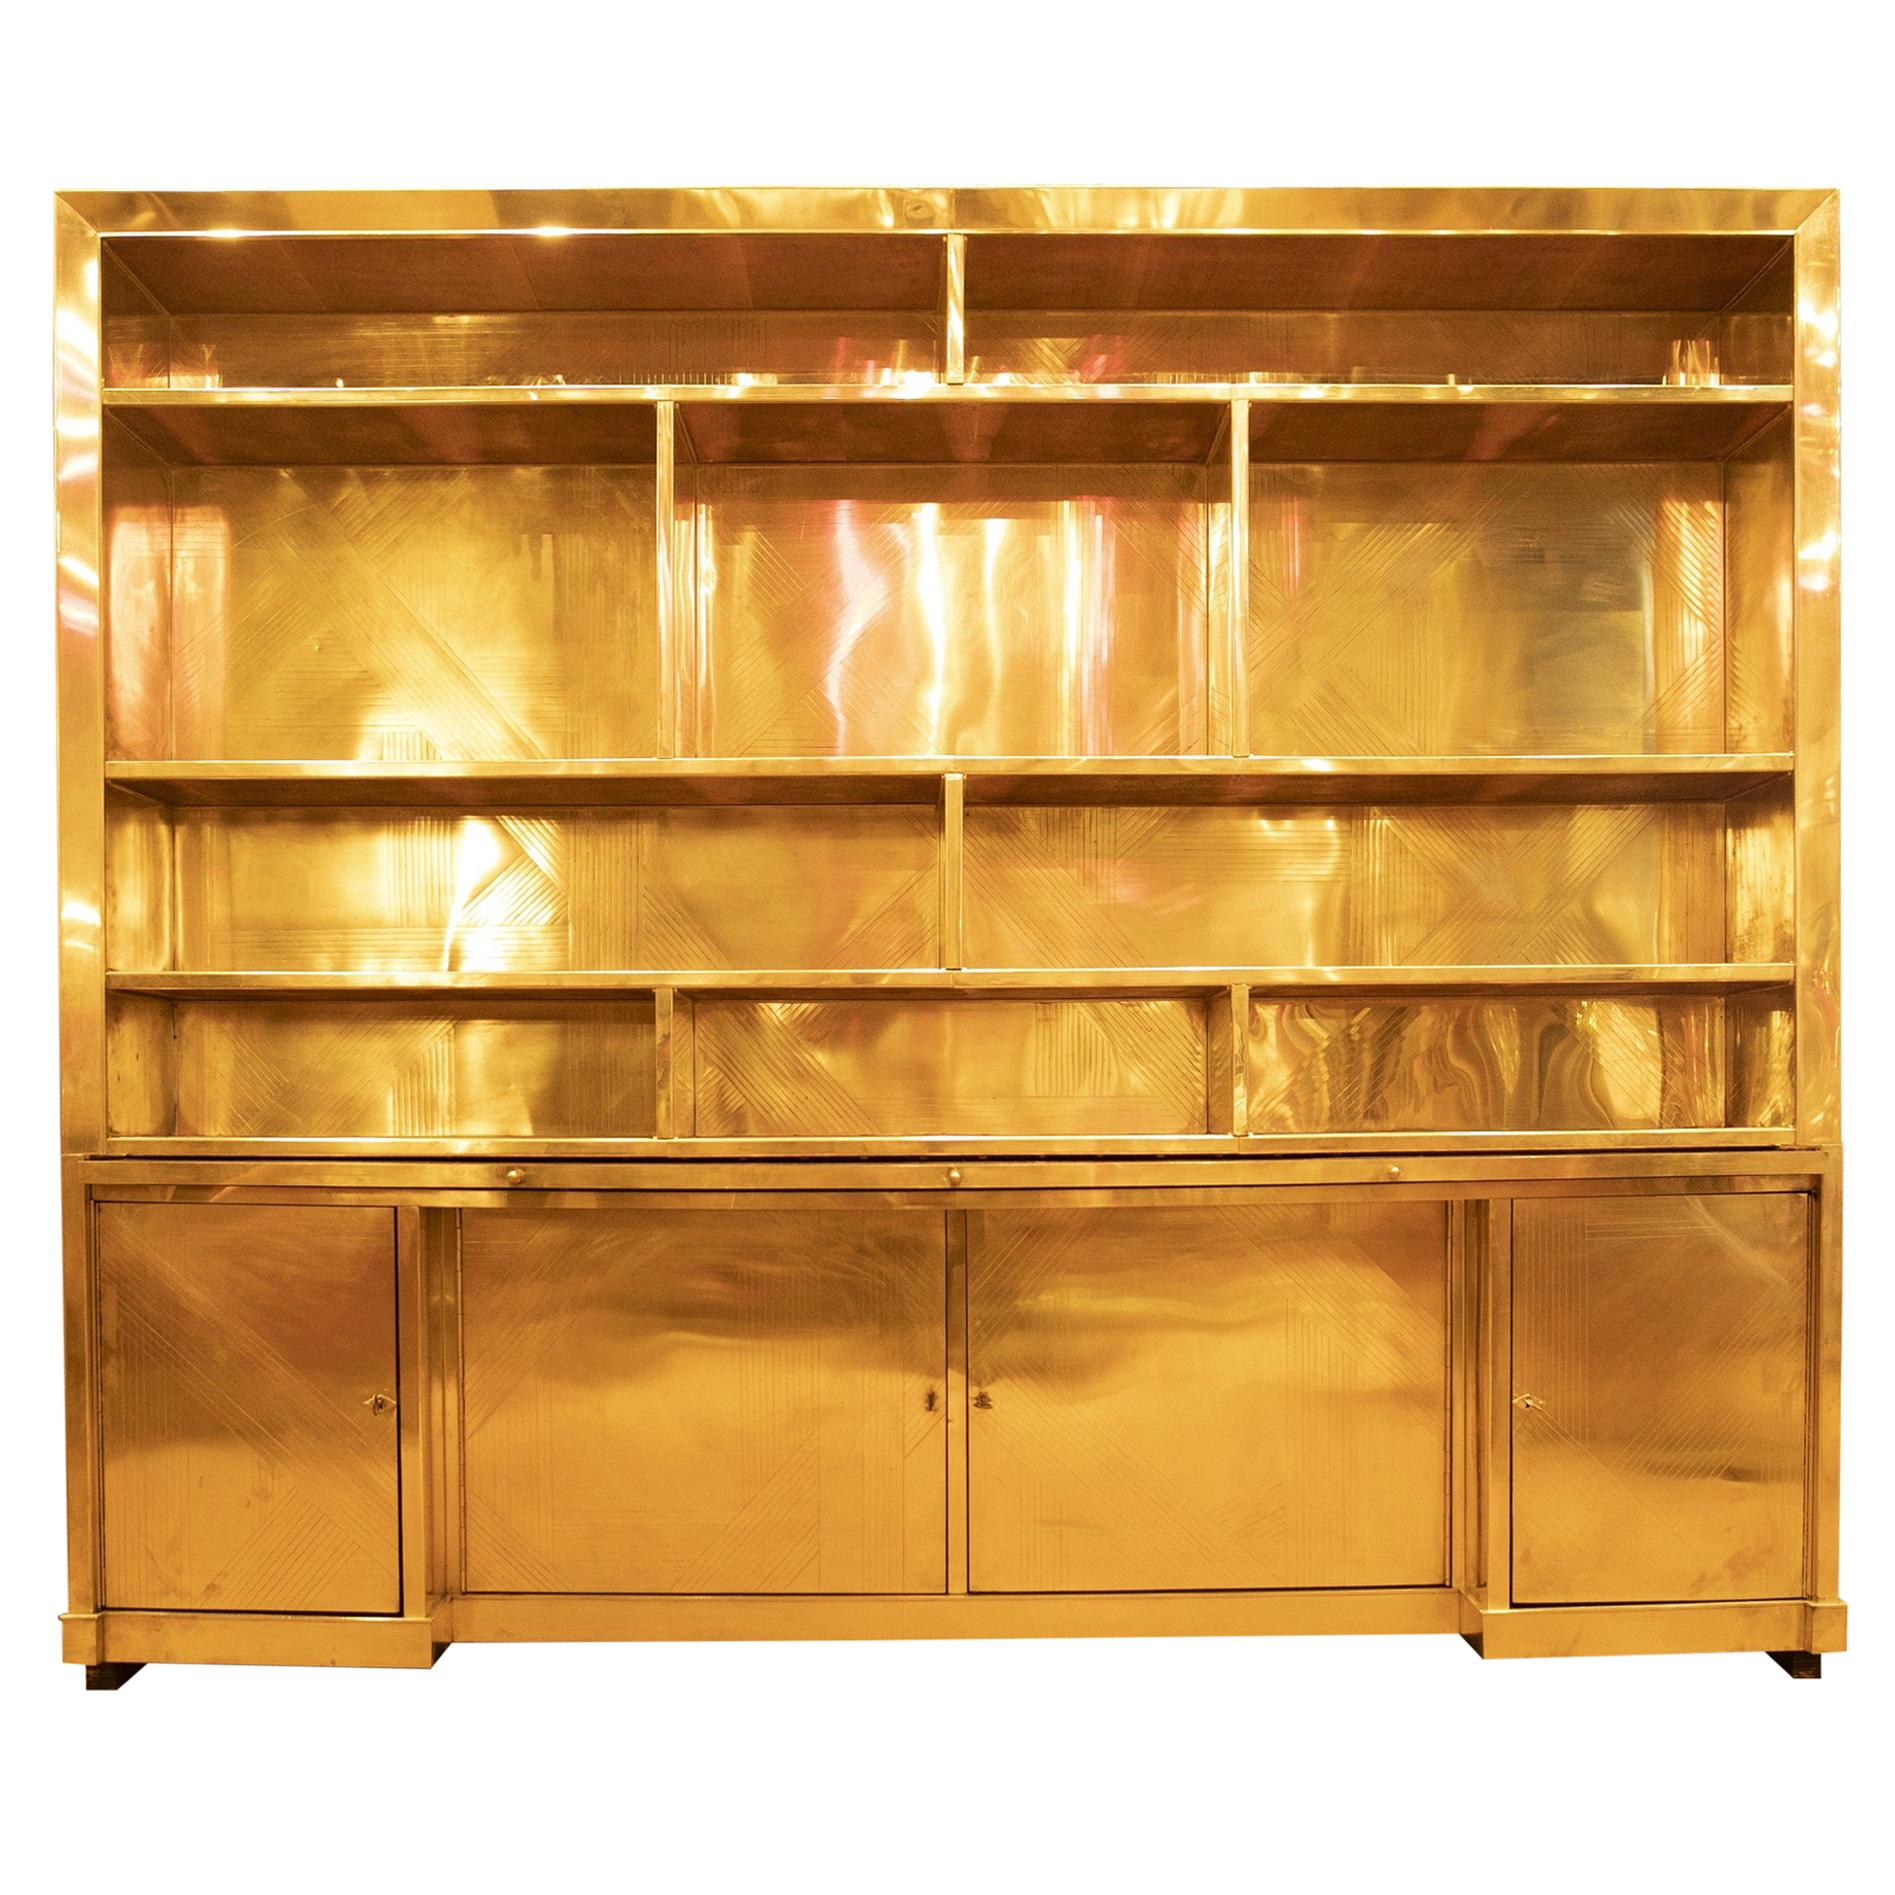  Brass wall sideboard / bookcase, Made in Italy 1990's, Italian manufacturer